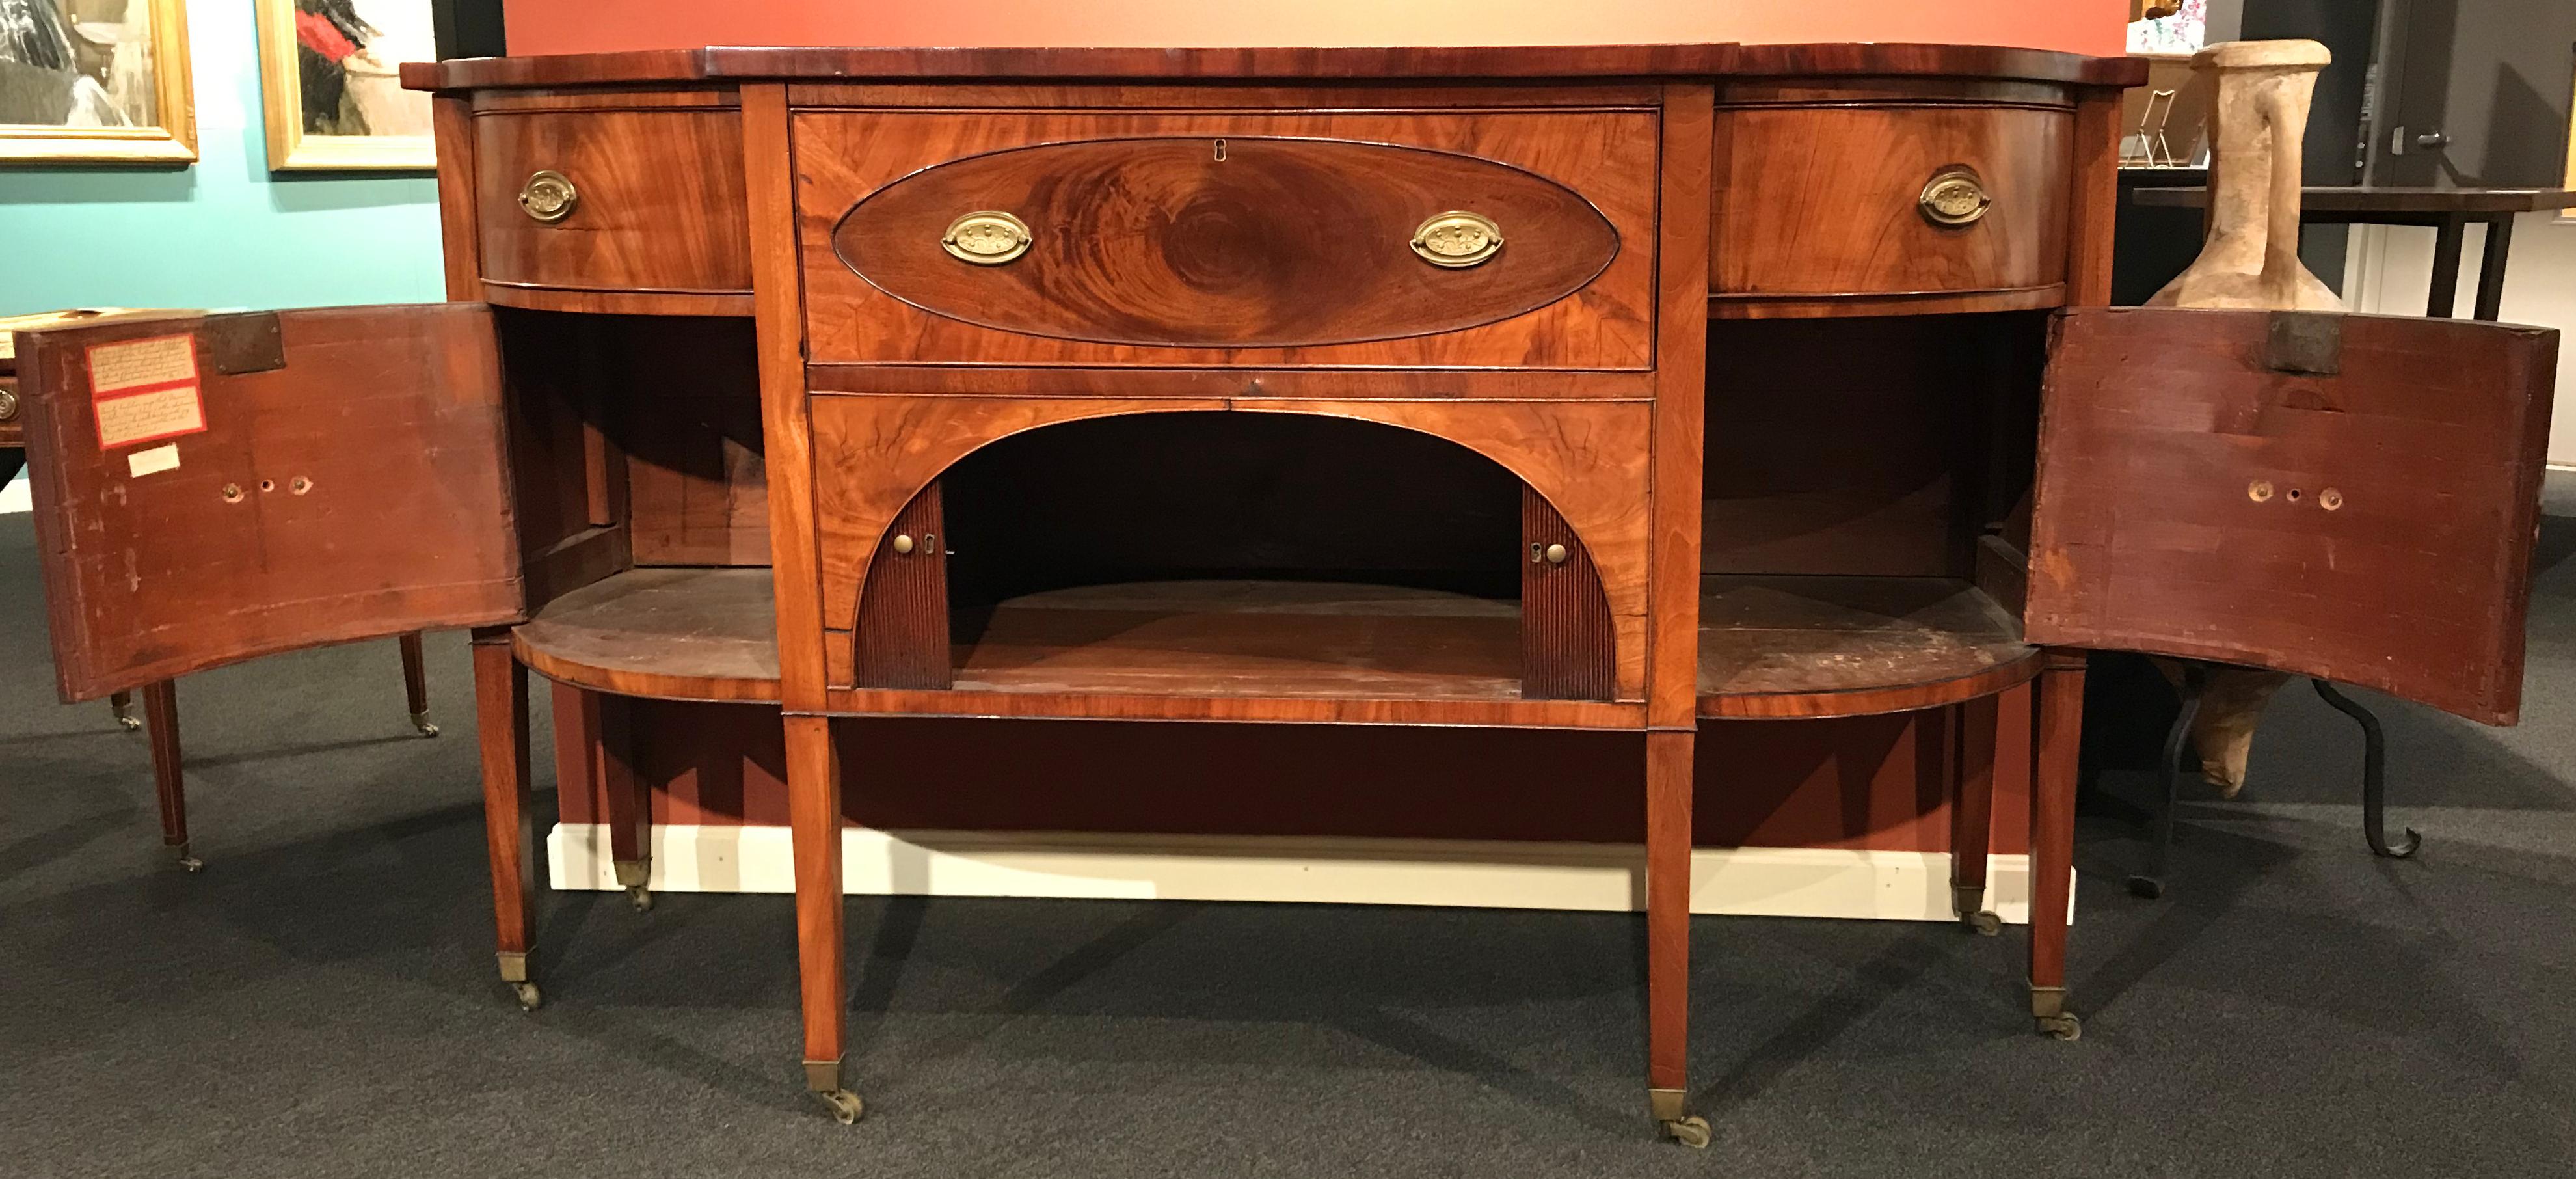 19th Century Demilune Mahogany Sideboard /Desk owned by Nathaniel Silsbee  1